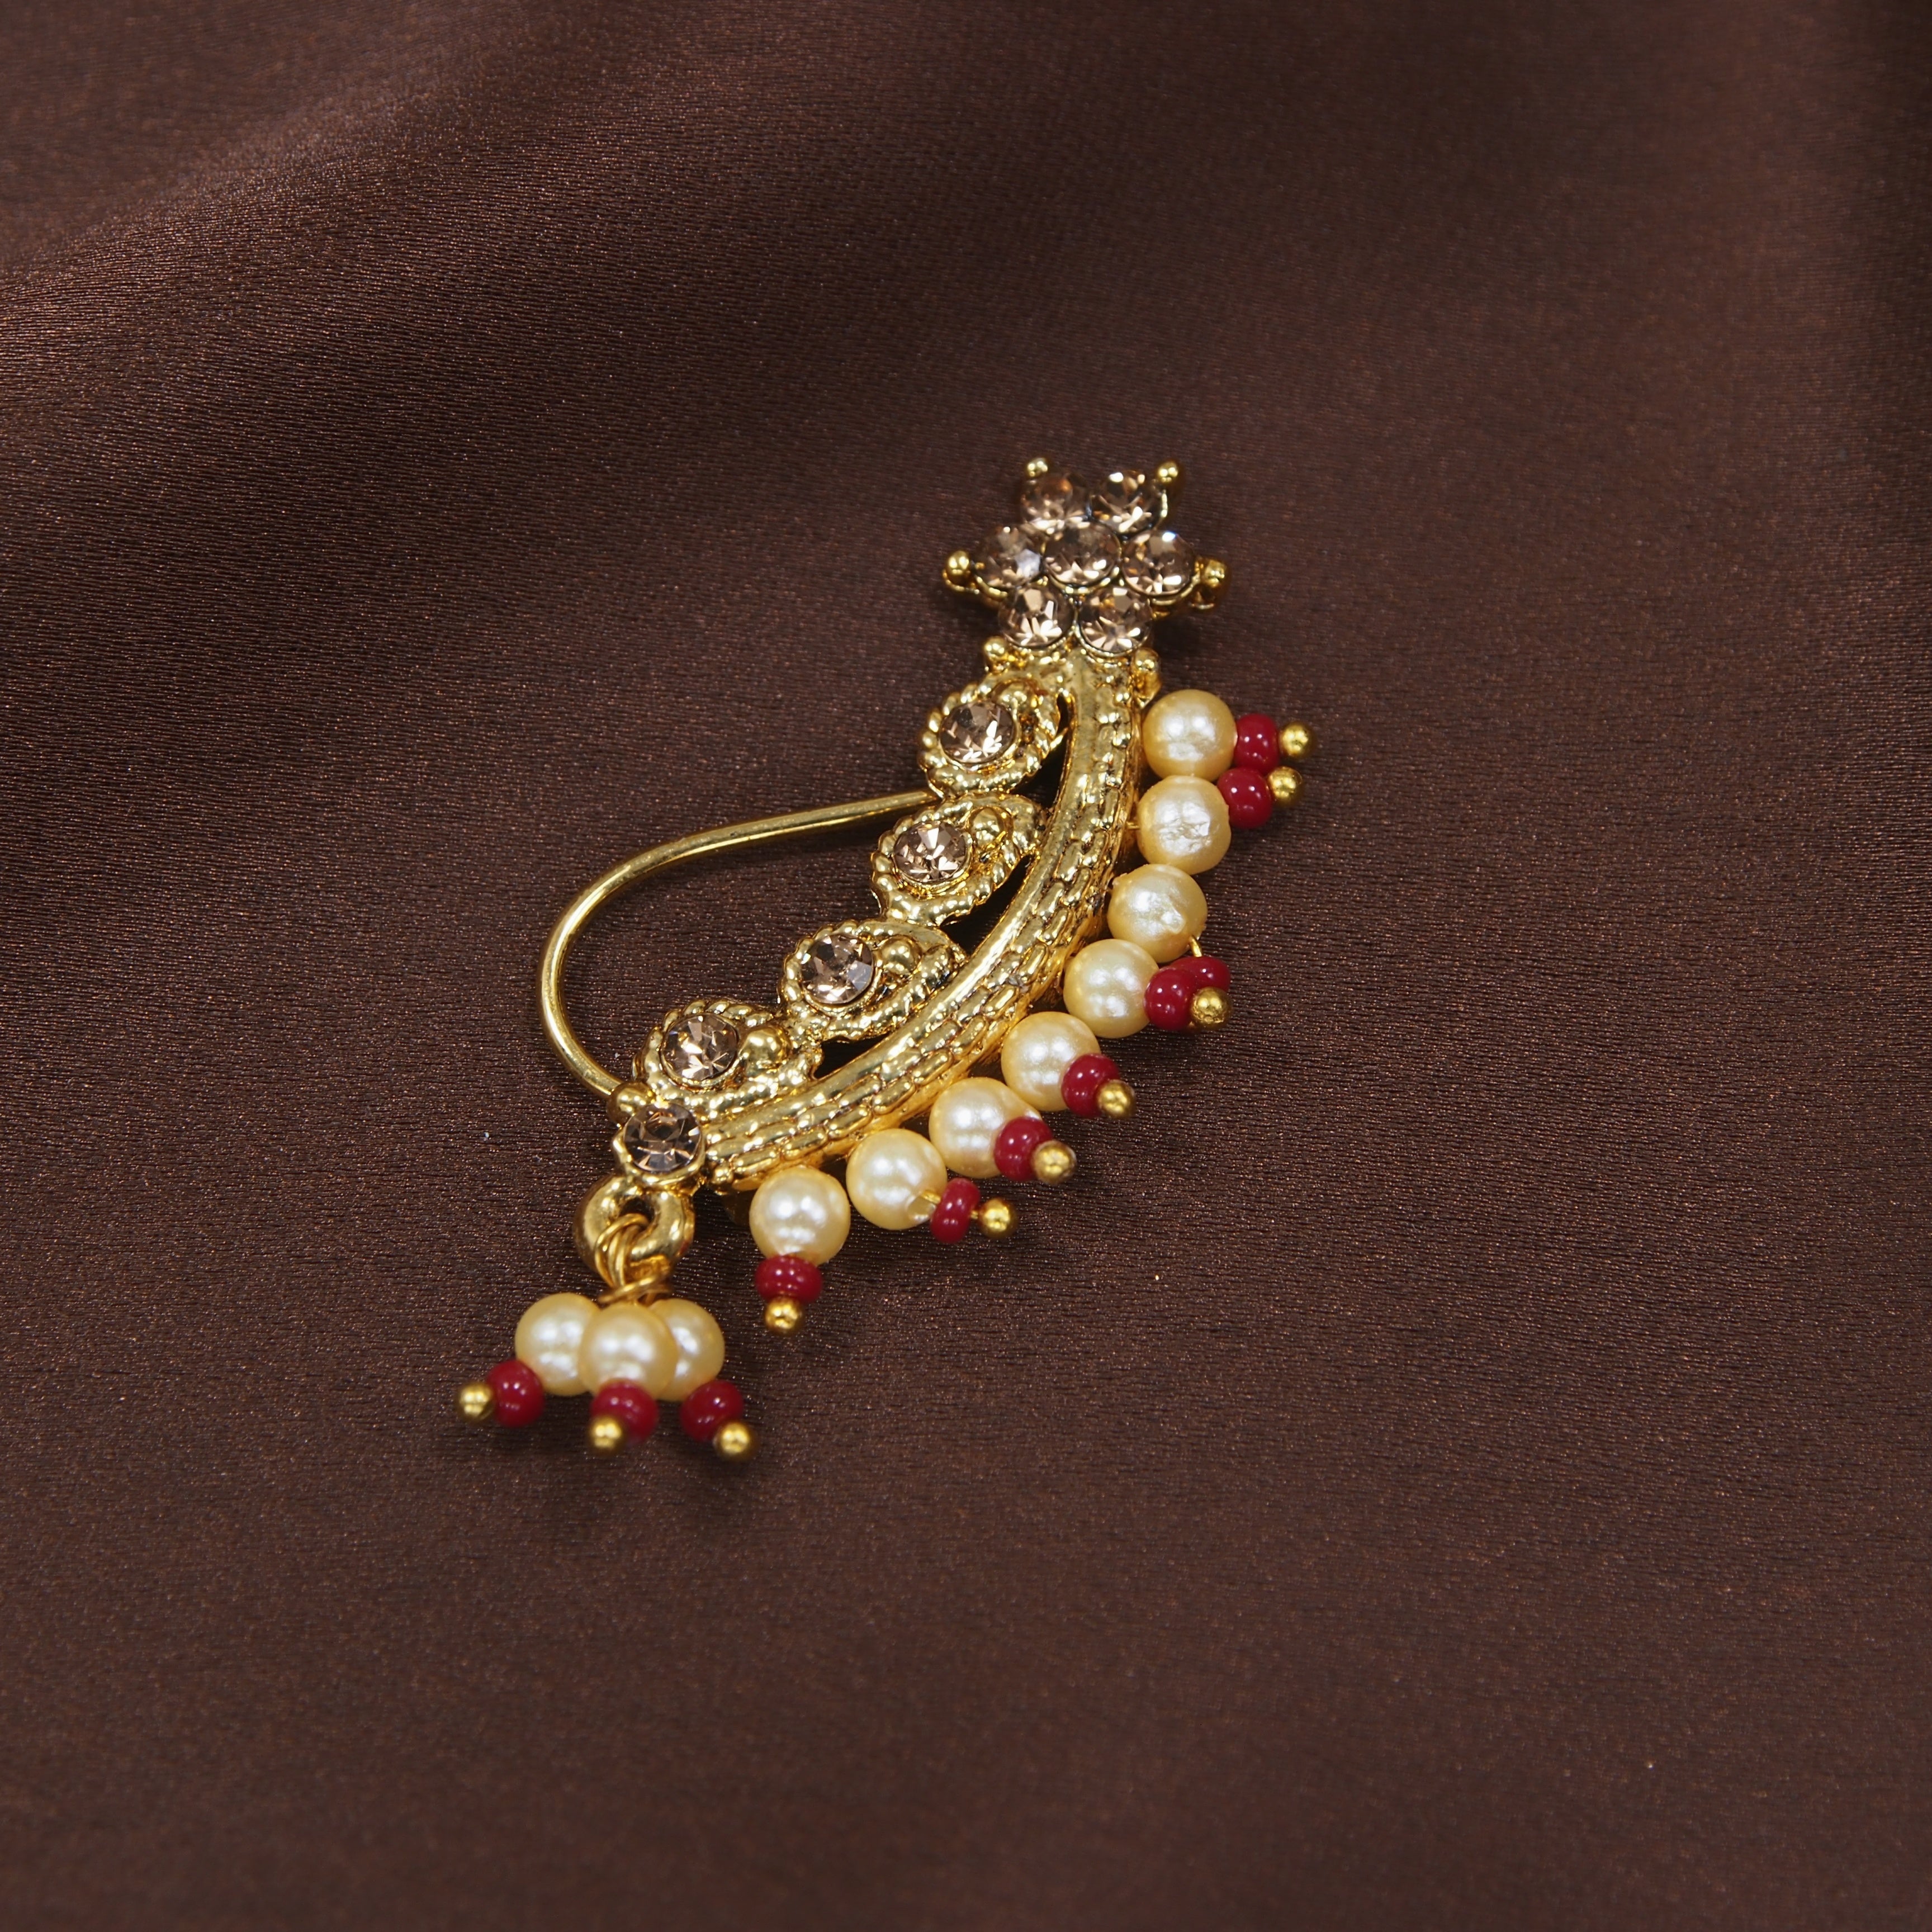 Nose Pin Marathi Style Gold Finish With Pearls By I Jewels